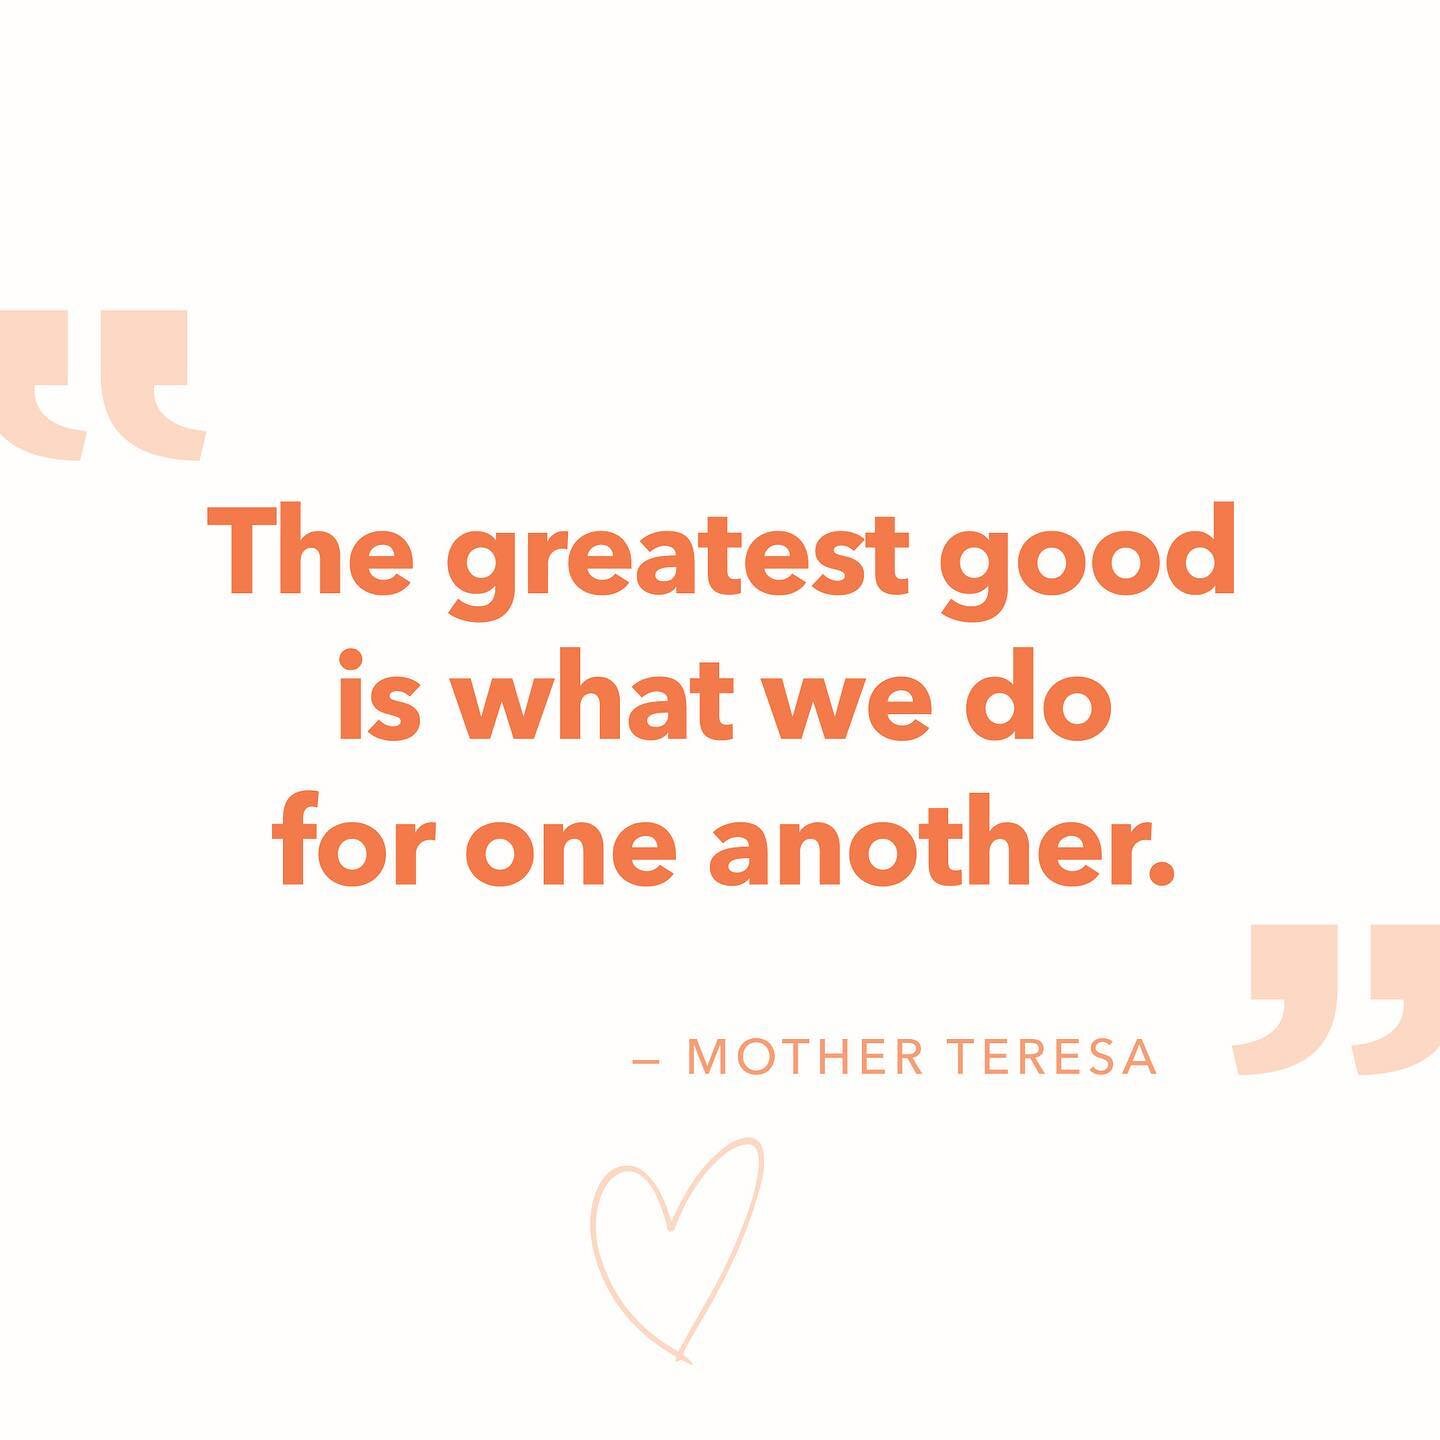 We&rsquo;re taking a moment to appreciate and uplift Community. And, how THIS community holds strong its dedication to being there for one another&mdash;both within the Alliance of Moms community and for young moms who have experienced foster care. T